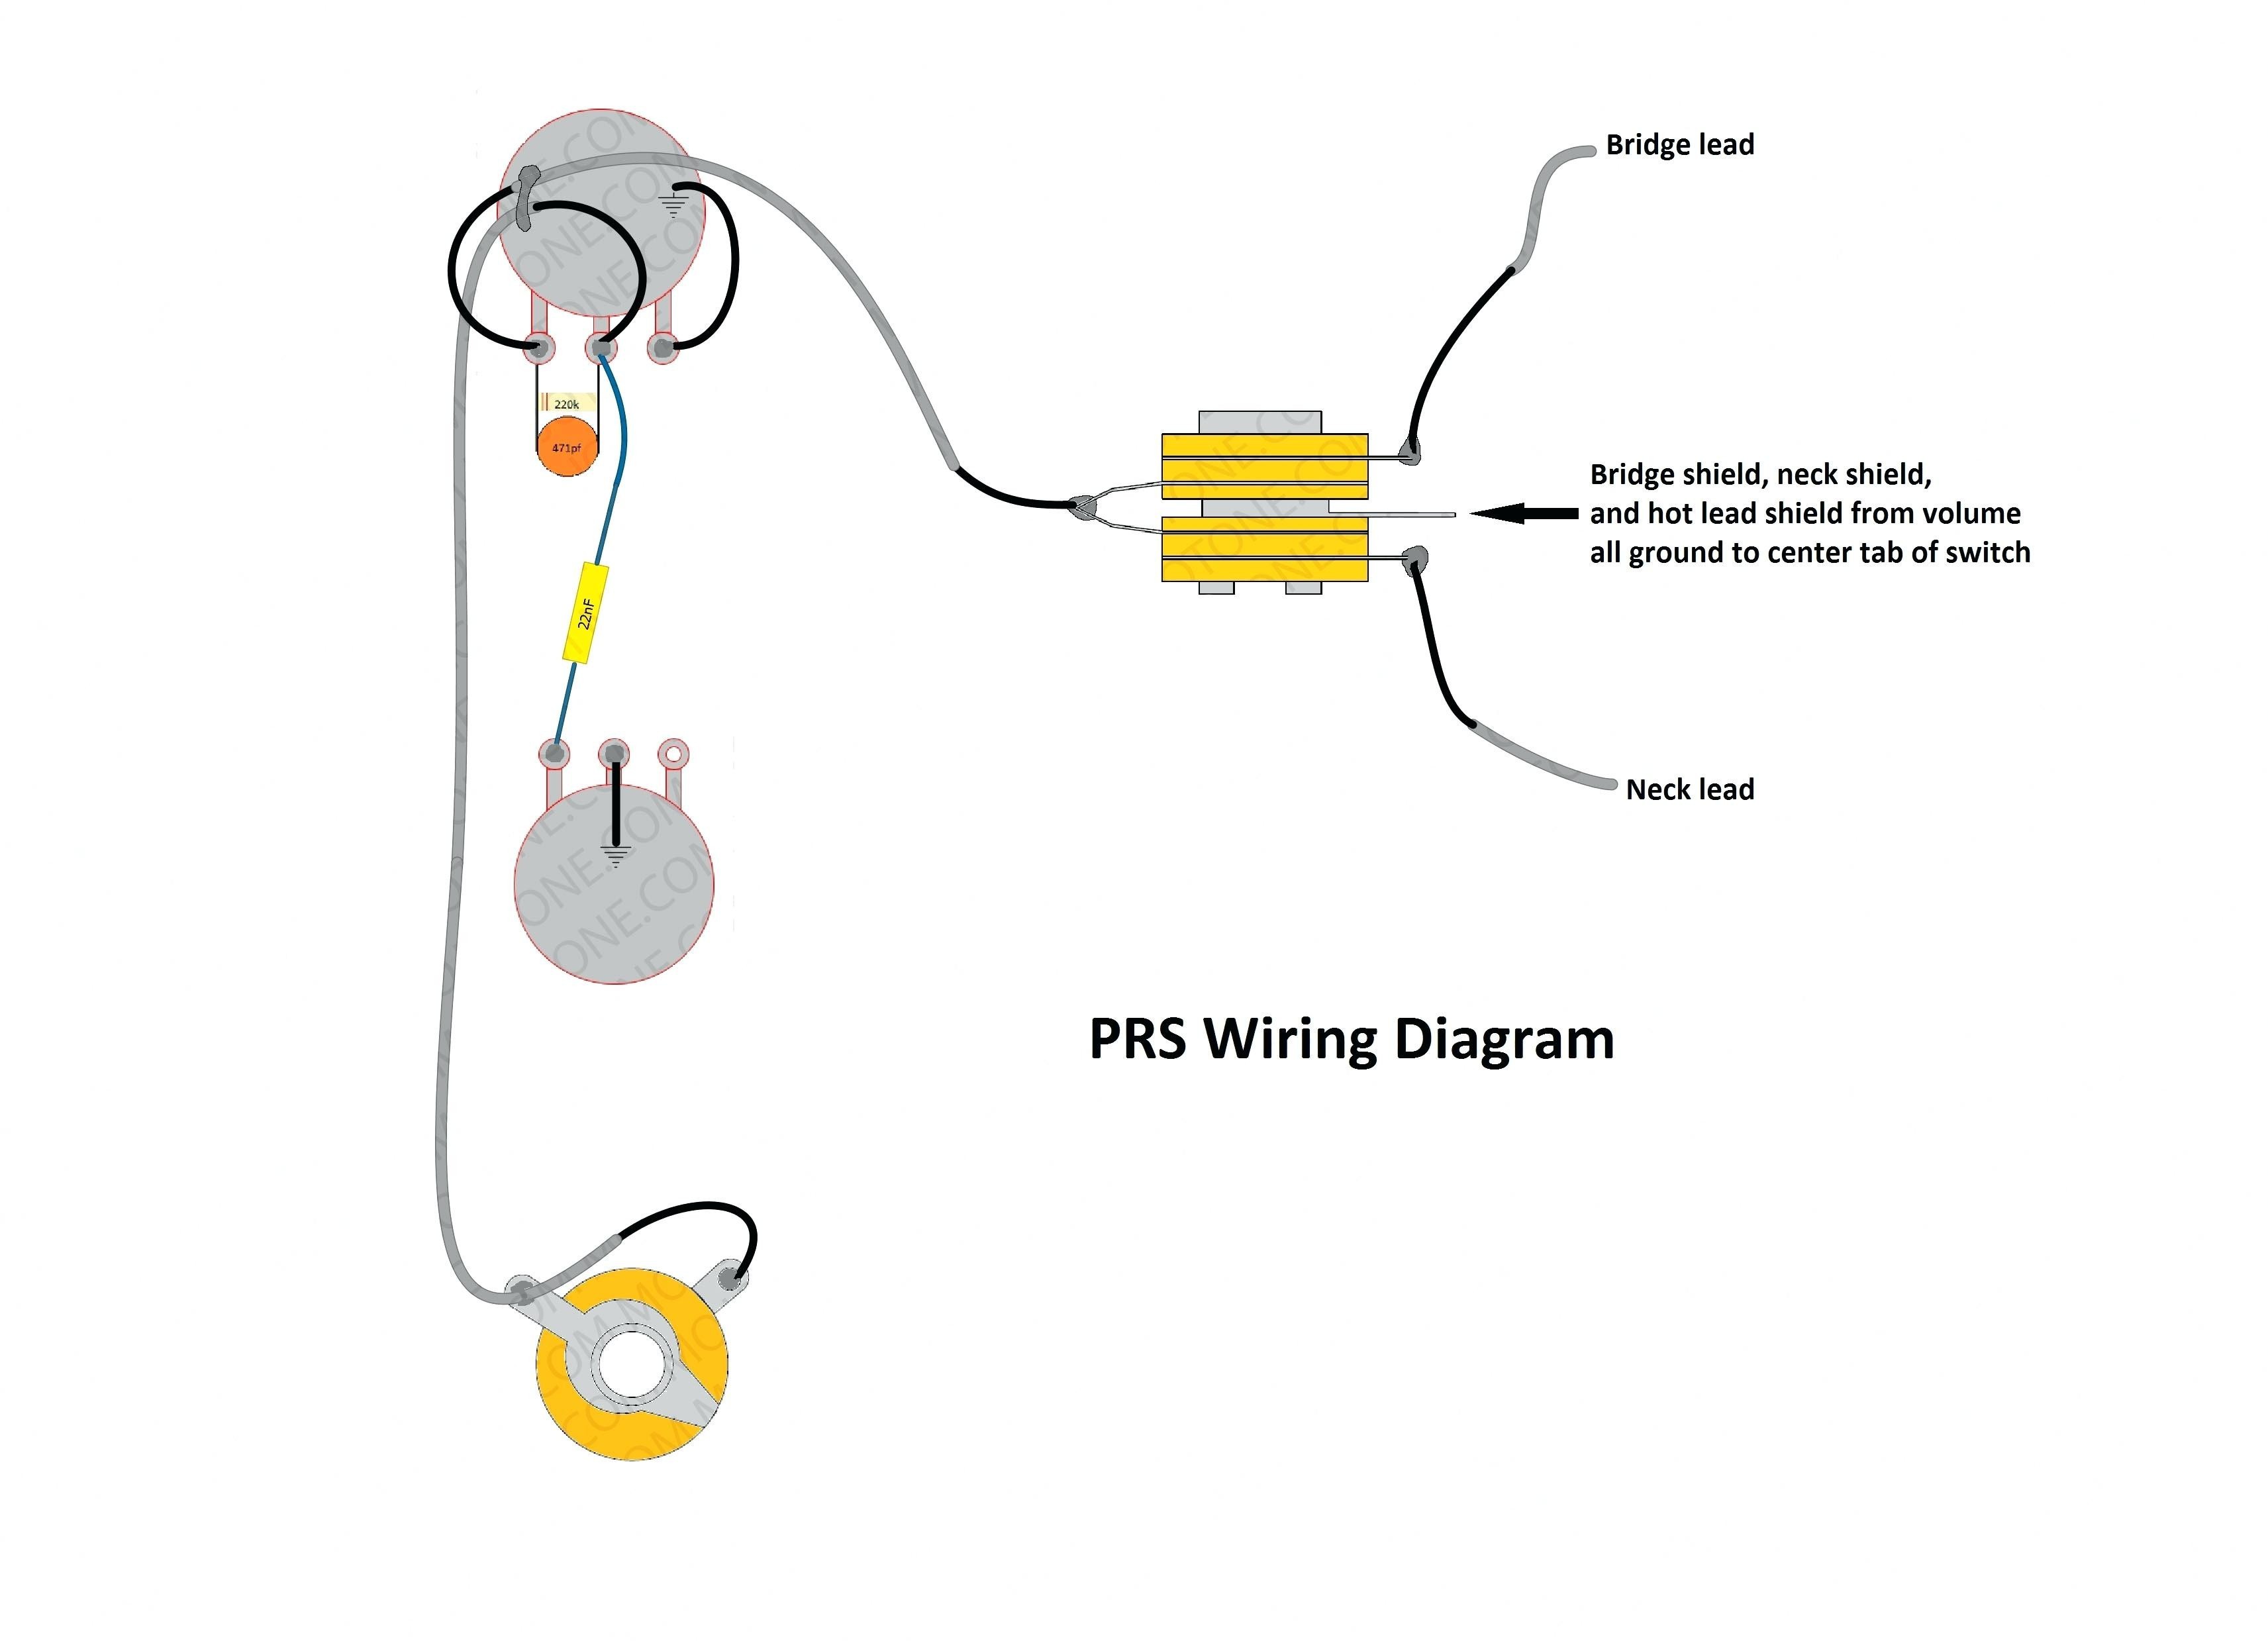 Wiring Diagram for Prs Guitars Refrence Wiring Diagram for A Guitar Save Fender Bass Wiring Diagrams